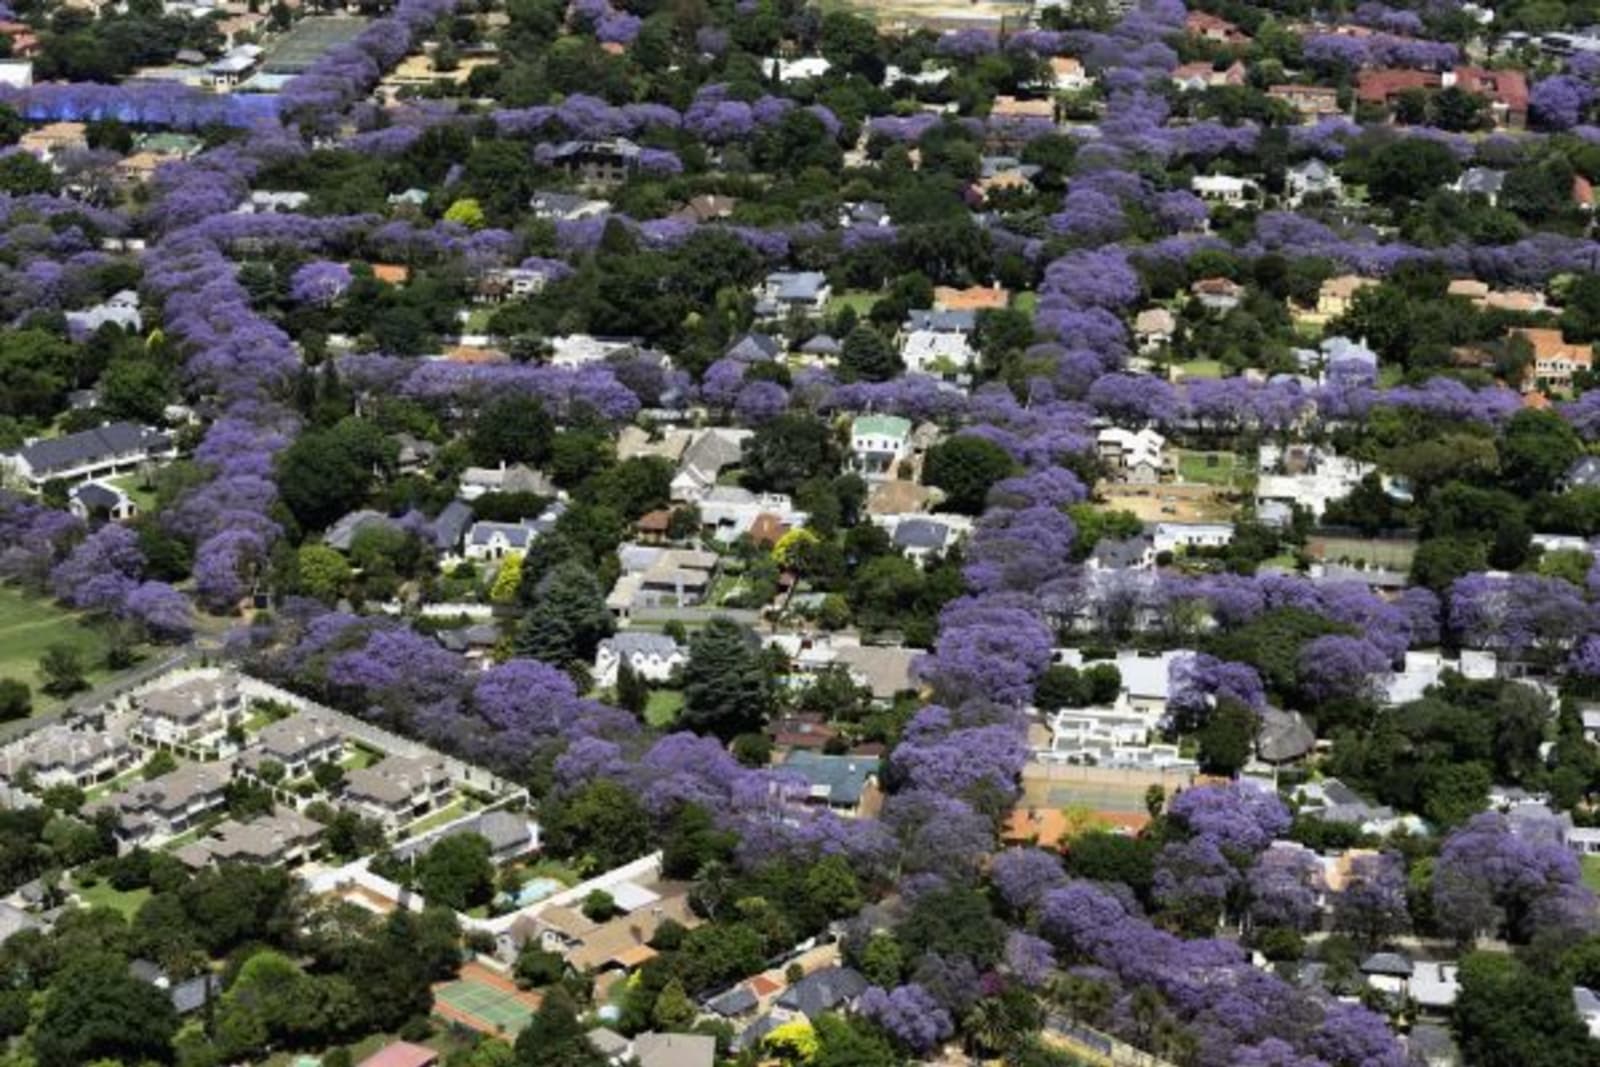 aerial view of subsurban johannesburg with jacarandas in bloom